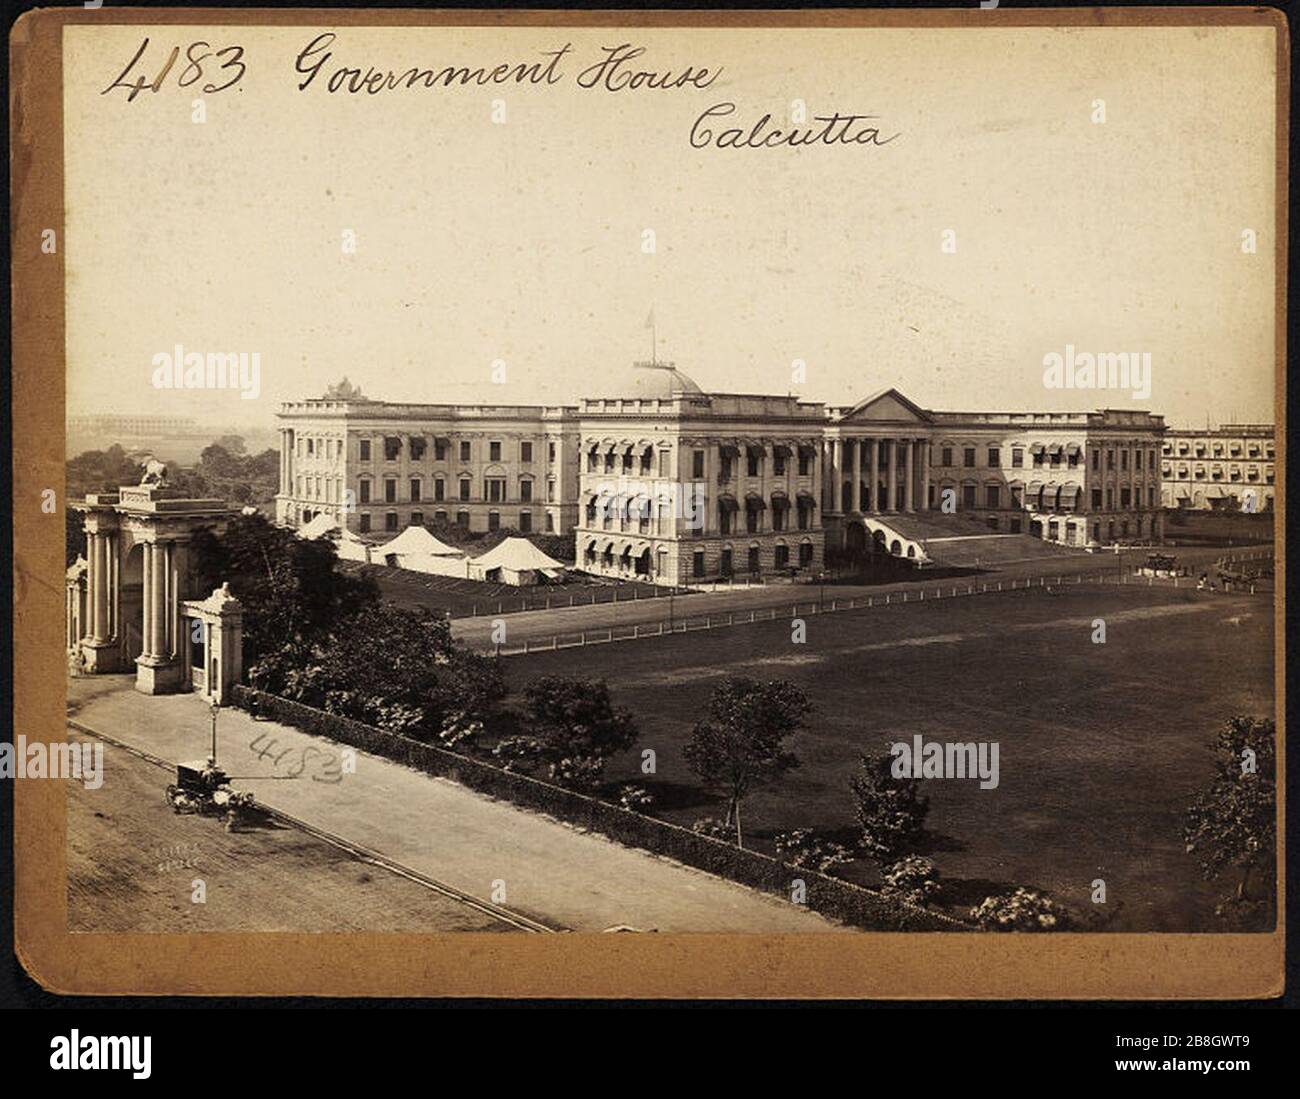 Government House Calcutta by Francis Frith (2). Stock Photo